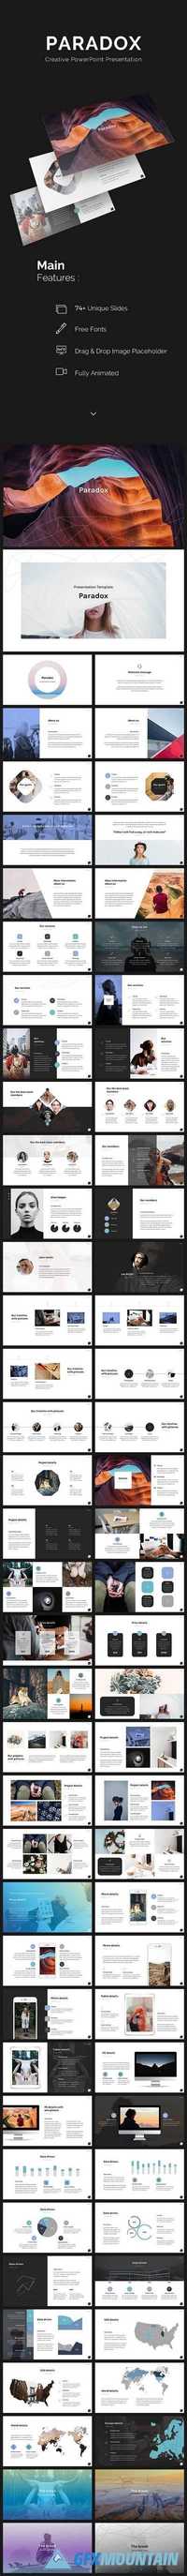 Paradox PowerPoint Template 20406480